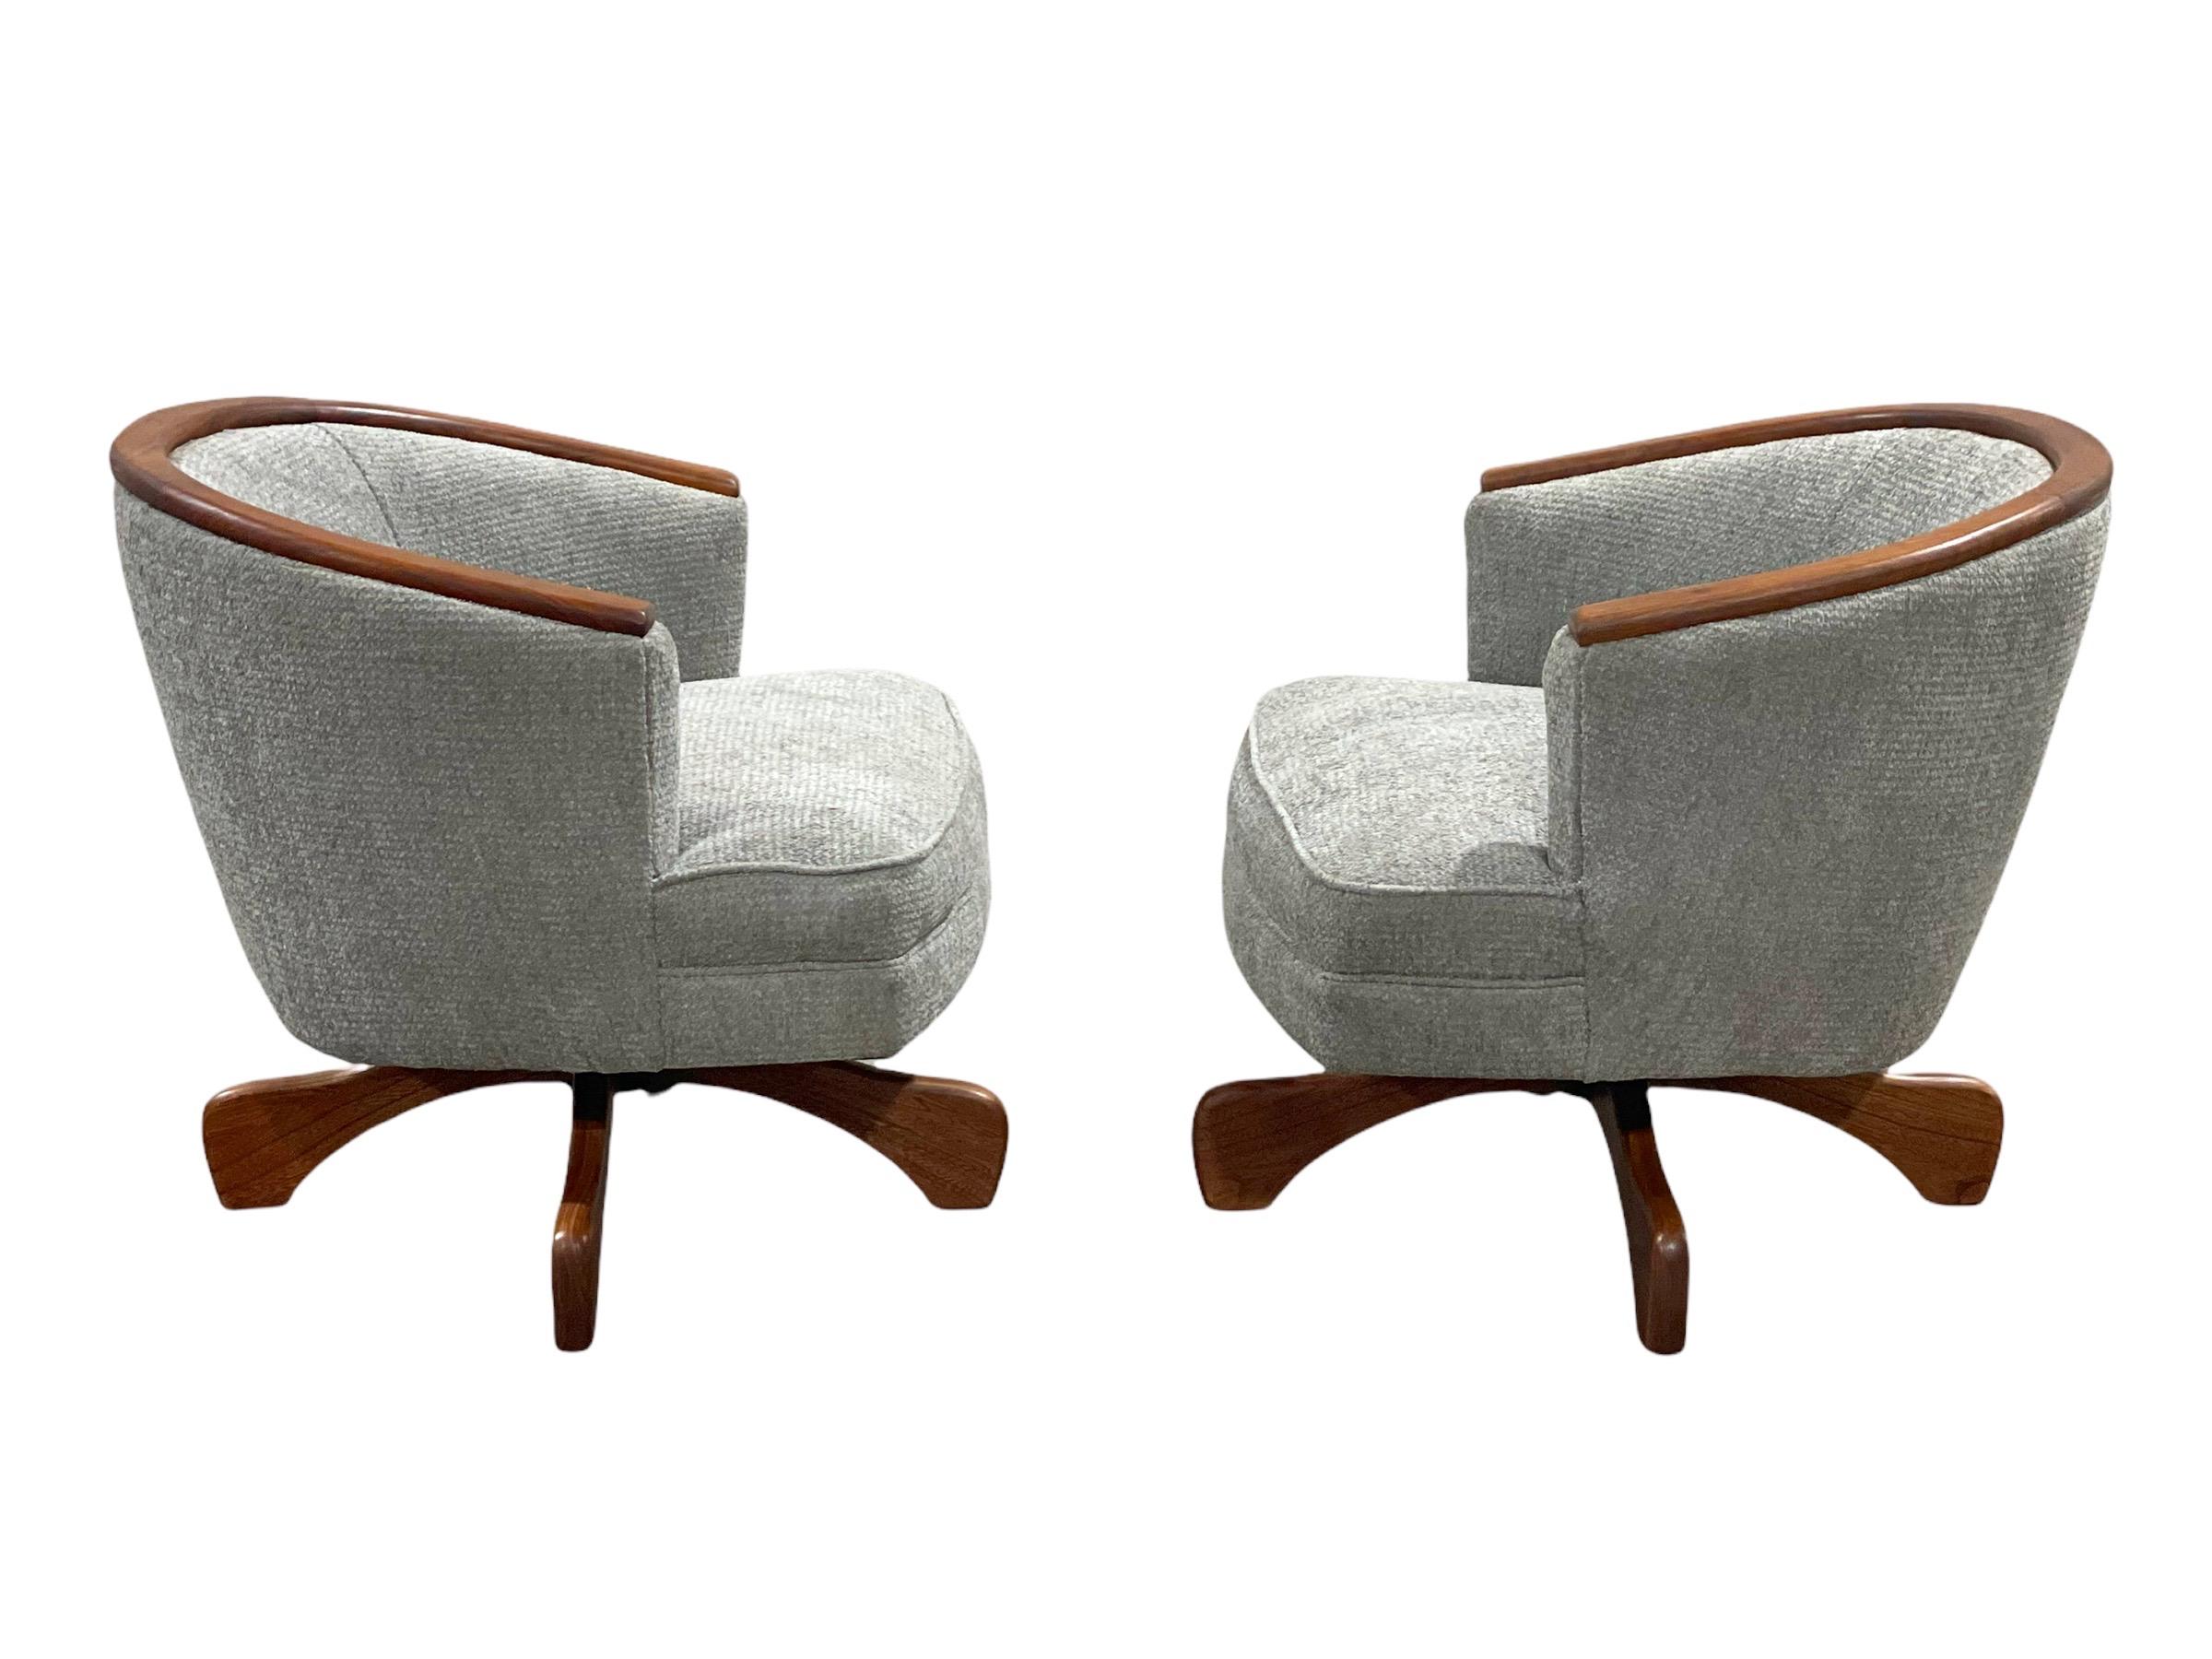 American Midcentury Swivel Club Barrel Chairs After Adrian Pearsall, Walnut + Boucle